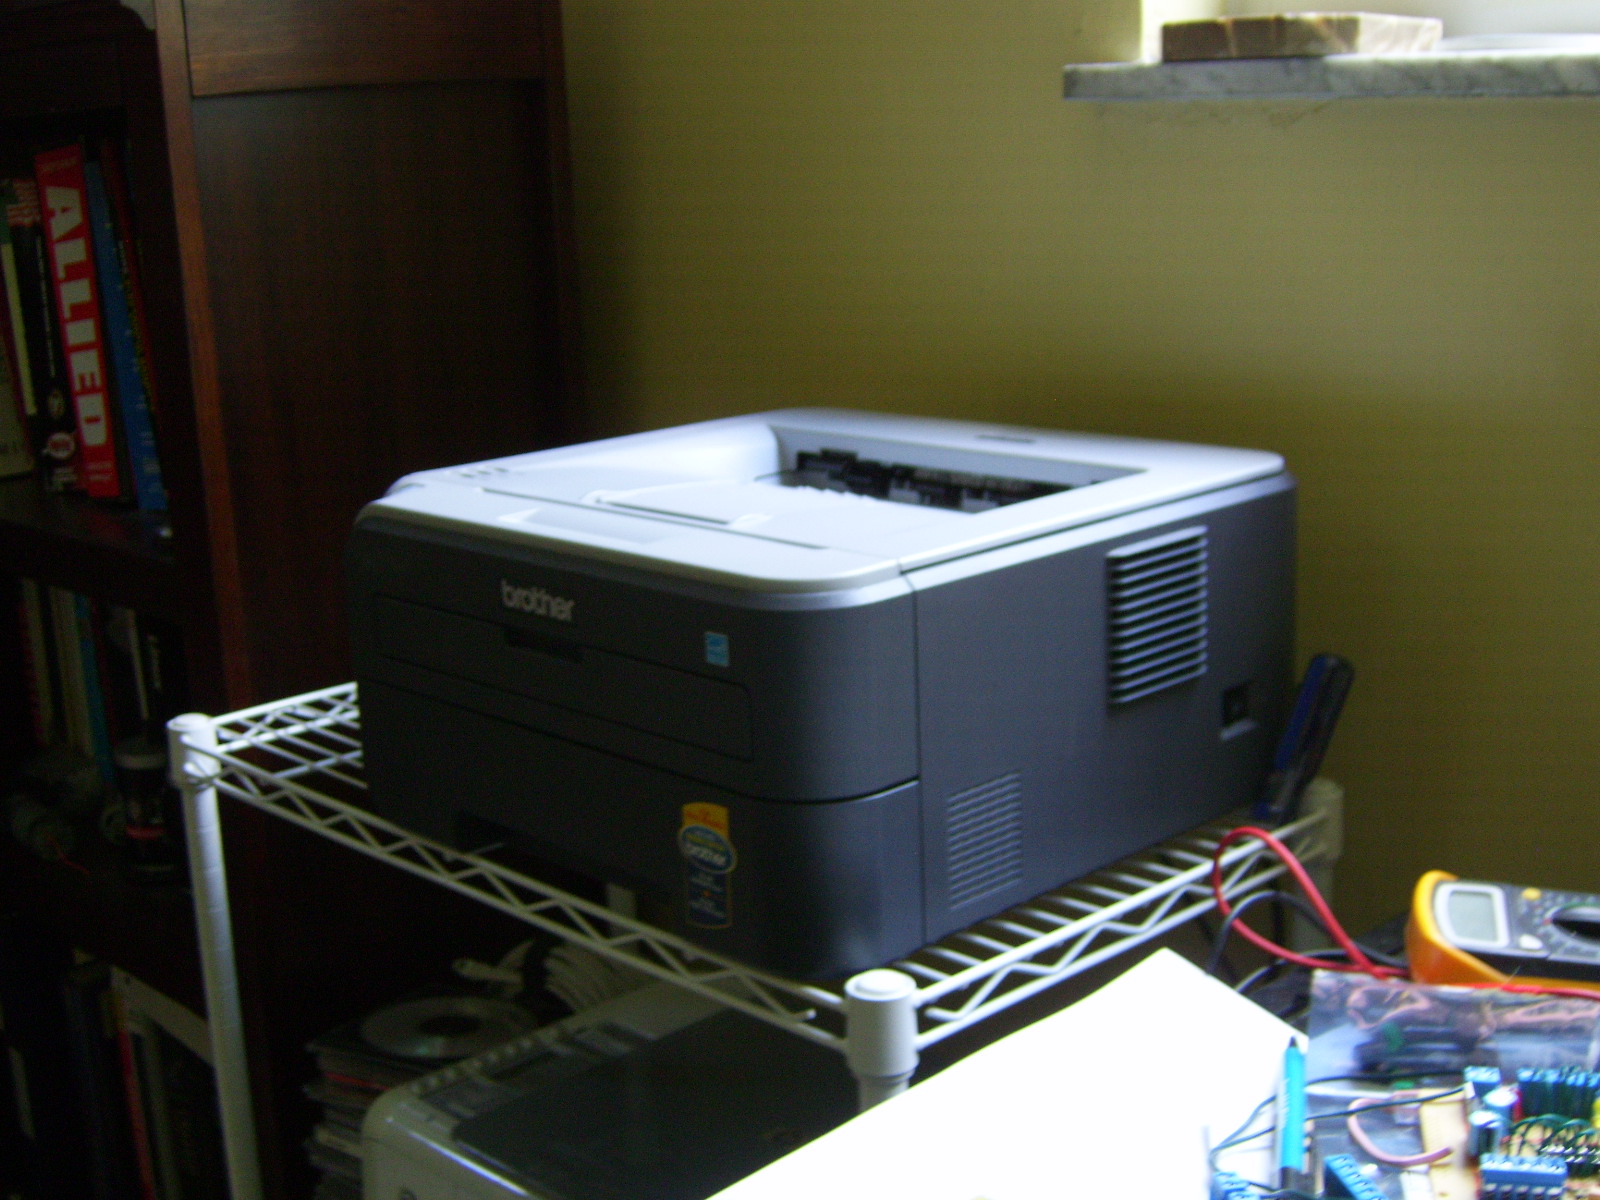 Yesterday I finally broke down and bought a laser printer (yay cheap ...